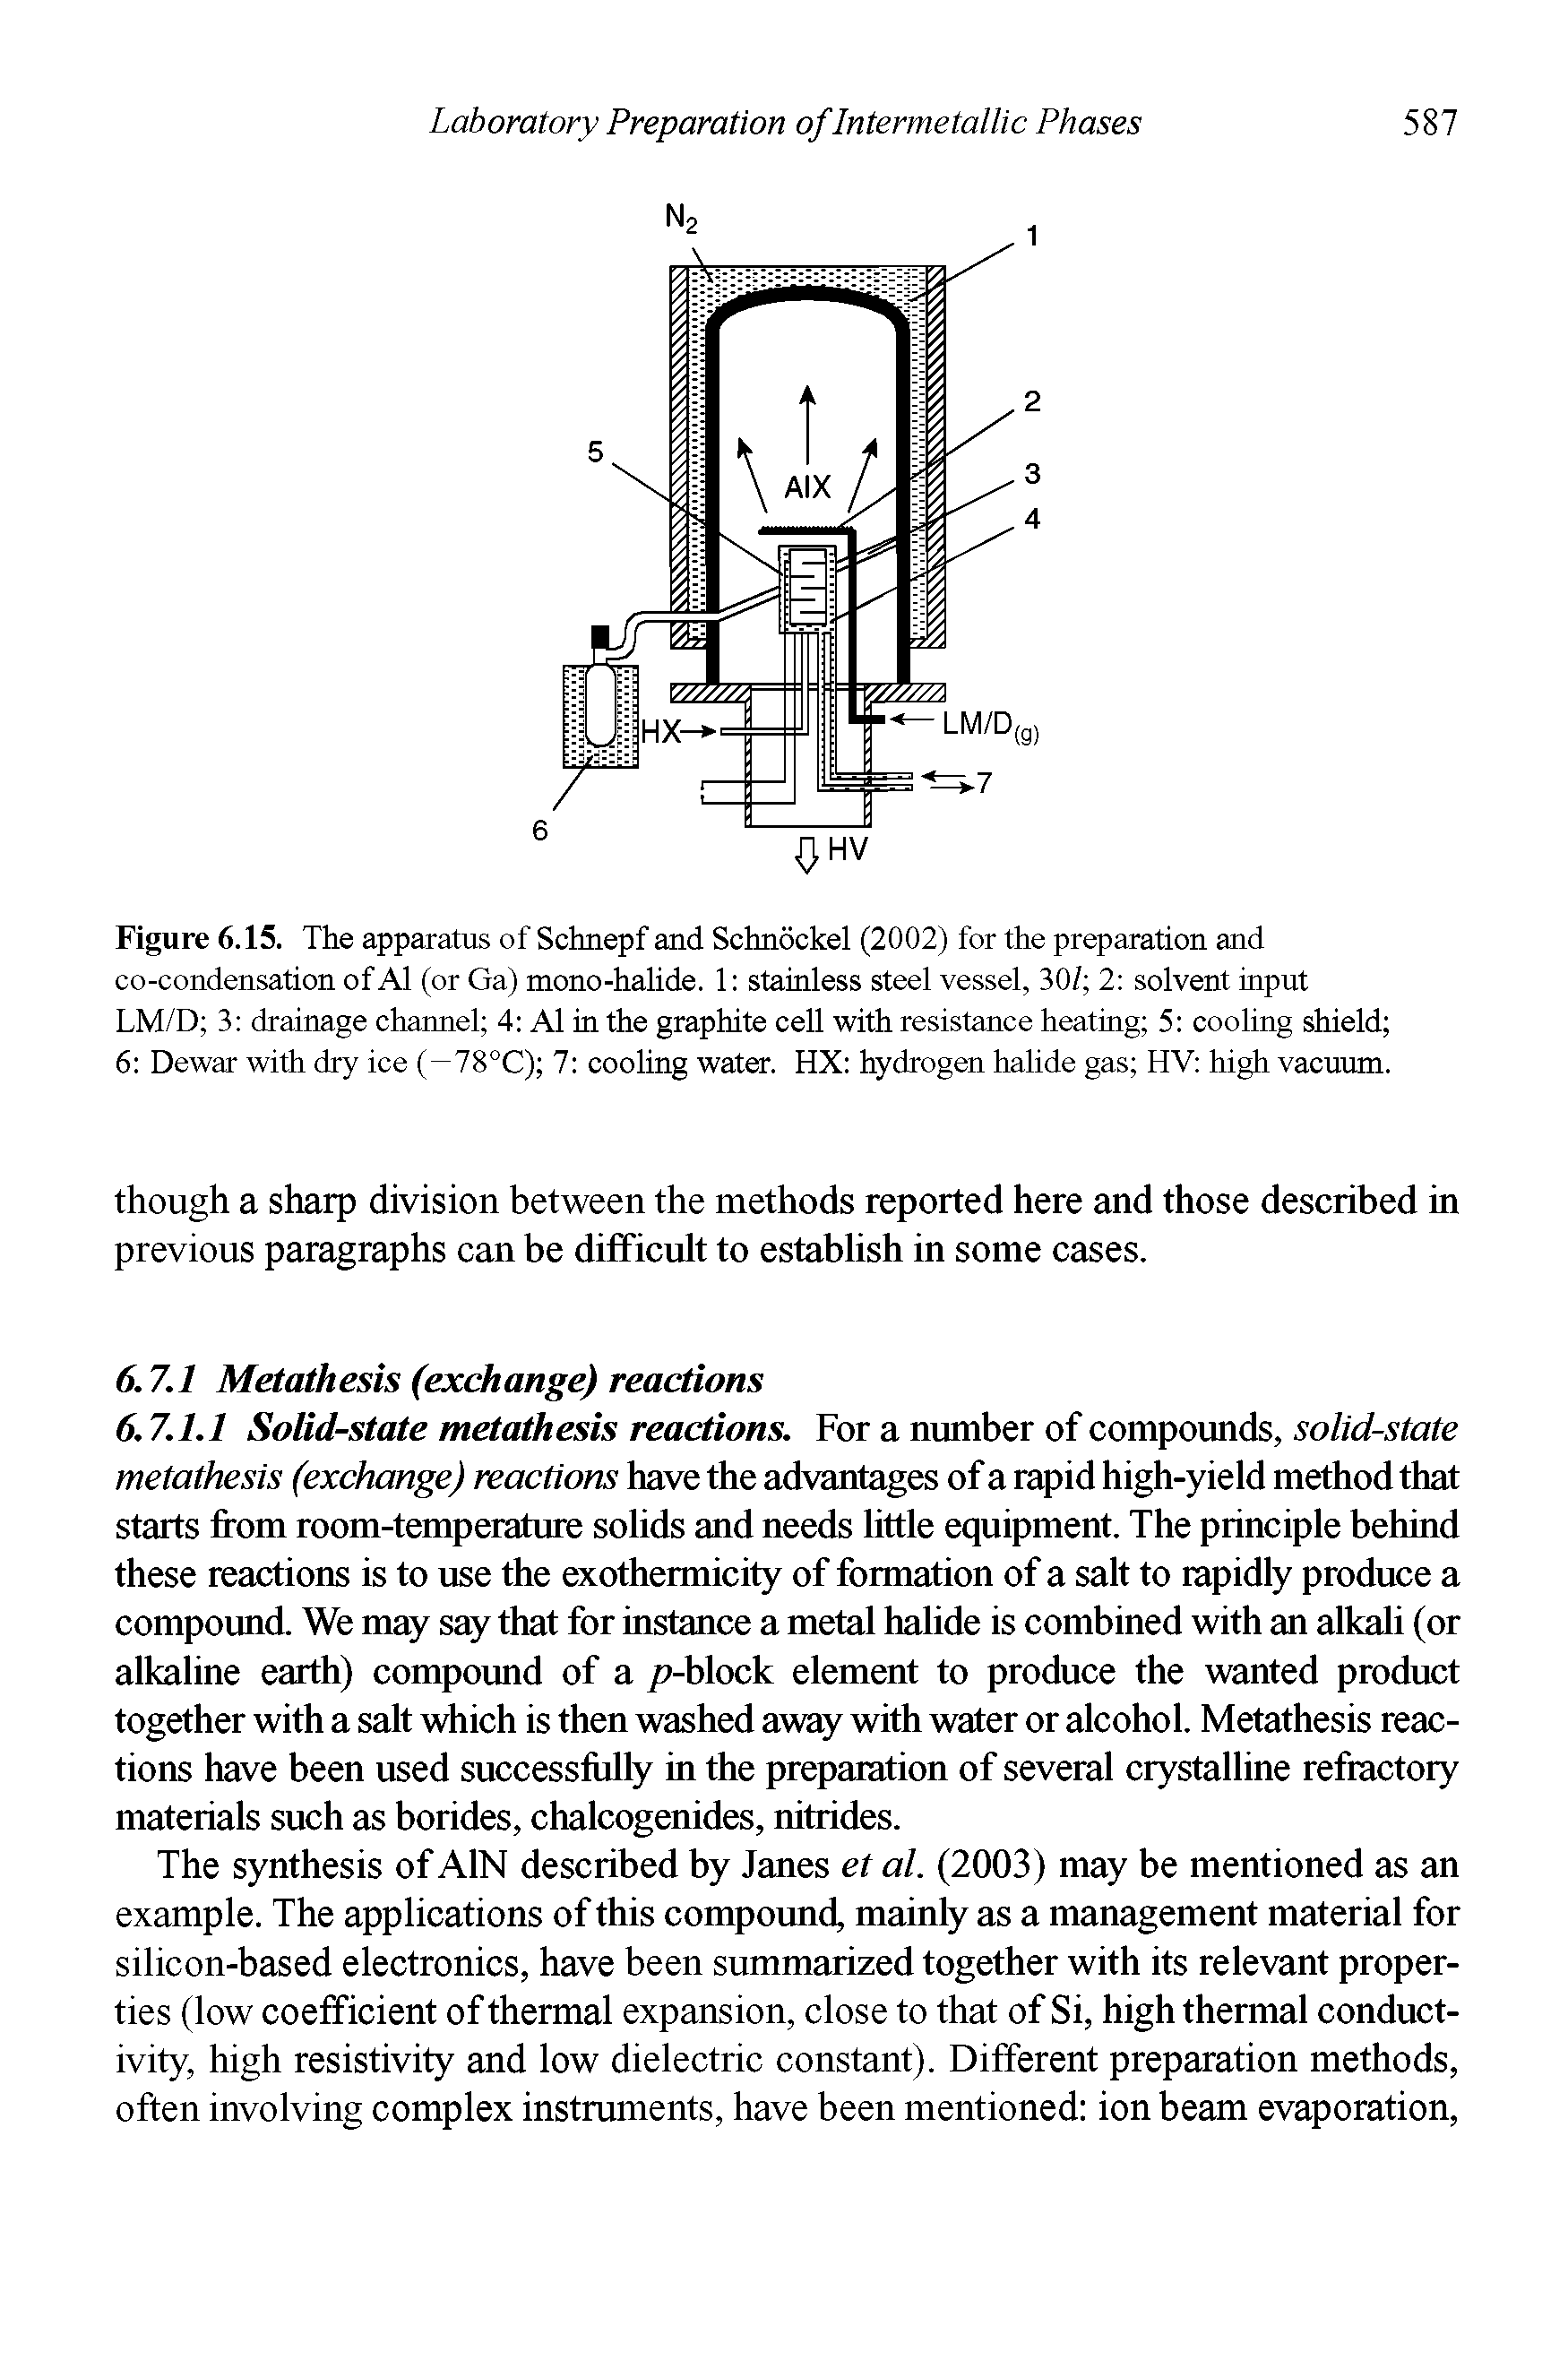 Figure 6.15. The apparatus of Schnepf and Schnockel (2002) for the preparation and co-condensation of A1 (or Ga) mono-halide. 1 stainless steel vessel, 30/ 2 solvent input LM/D 3 drainage channel 4 A1 in the graphite cell with resistance heating 5 cooling shield 6 Dewar with dry ice (—78°C) 7 cooling water. HX hydrogen halide gas HV high vacuum.